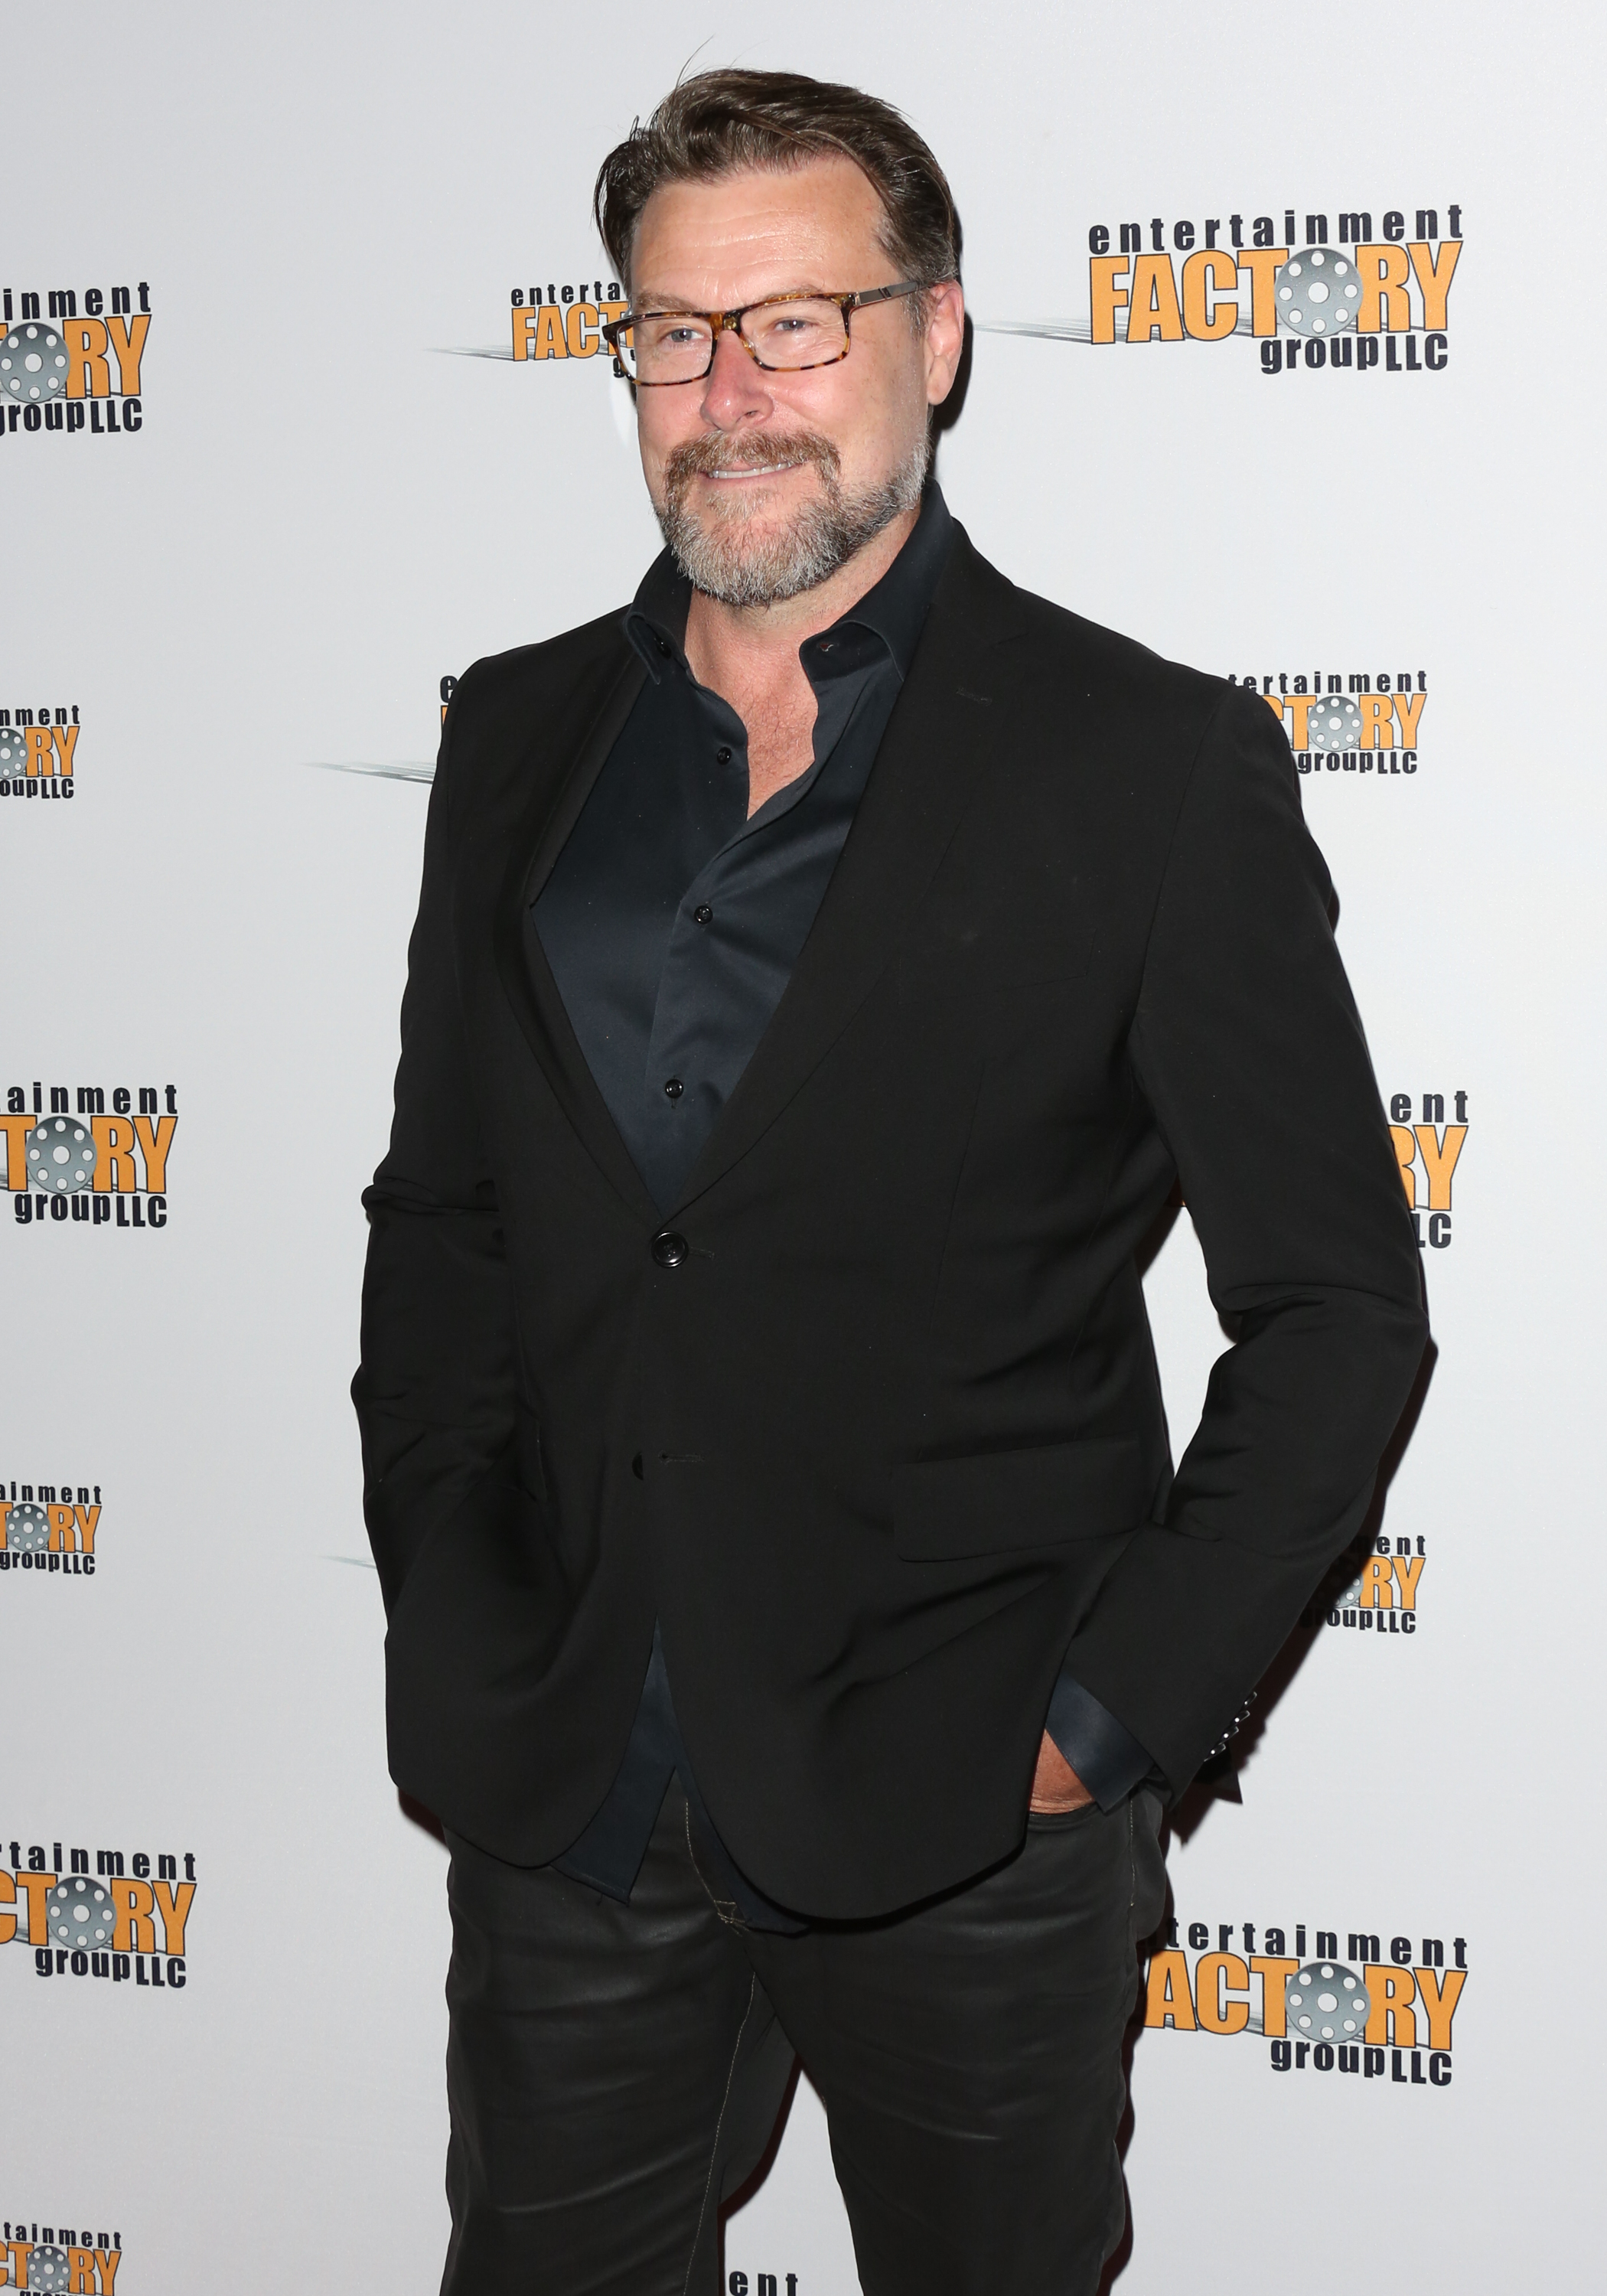 Dean McDermott attends the screening of "Garlic And Gunpowder" in Hollywood, California, on July 6, 2017. | Source: Getty Images